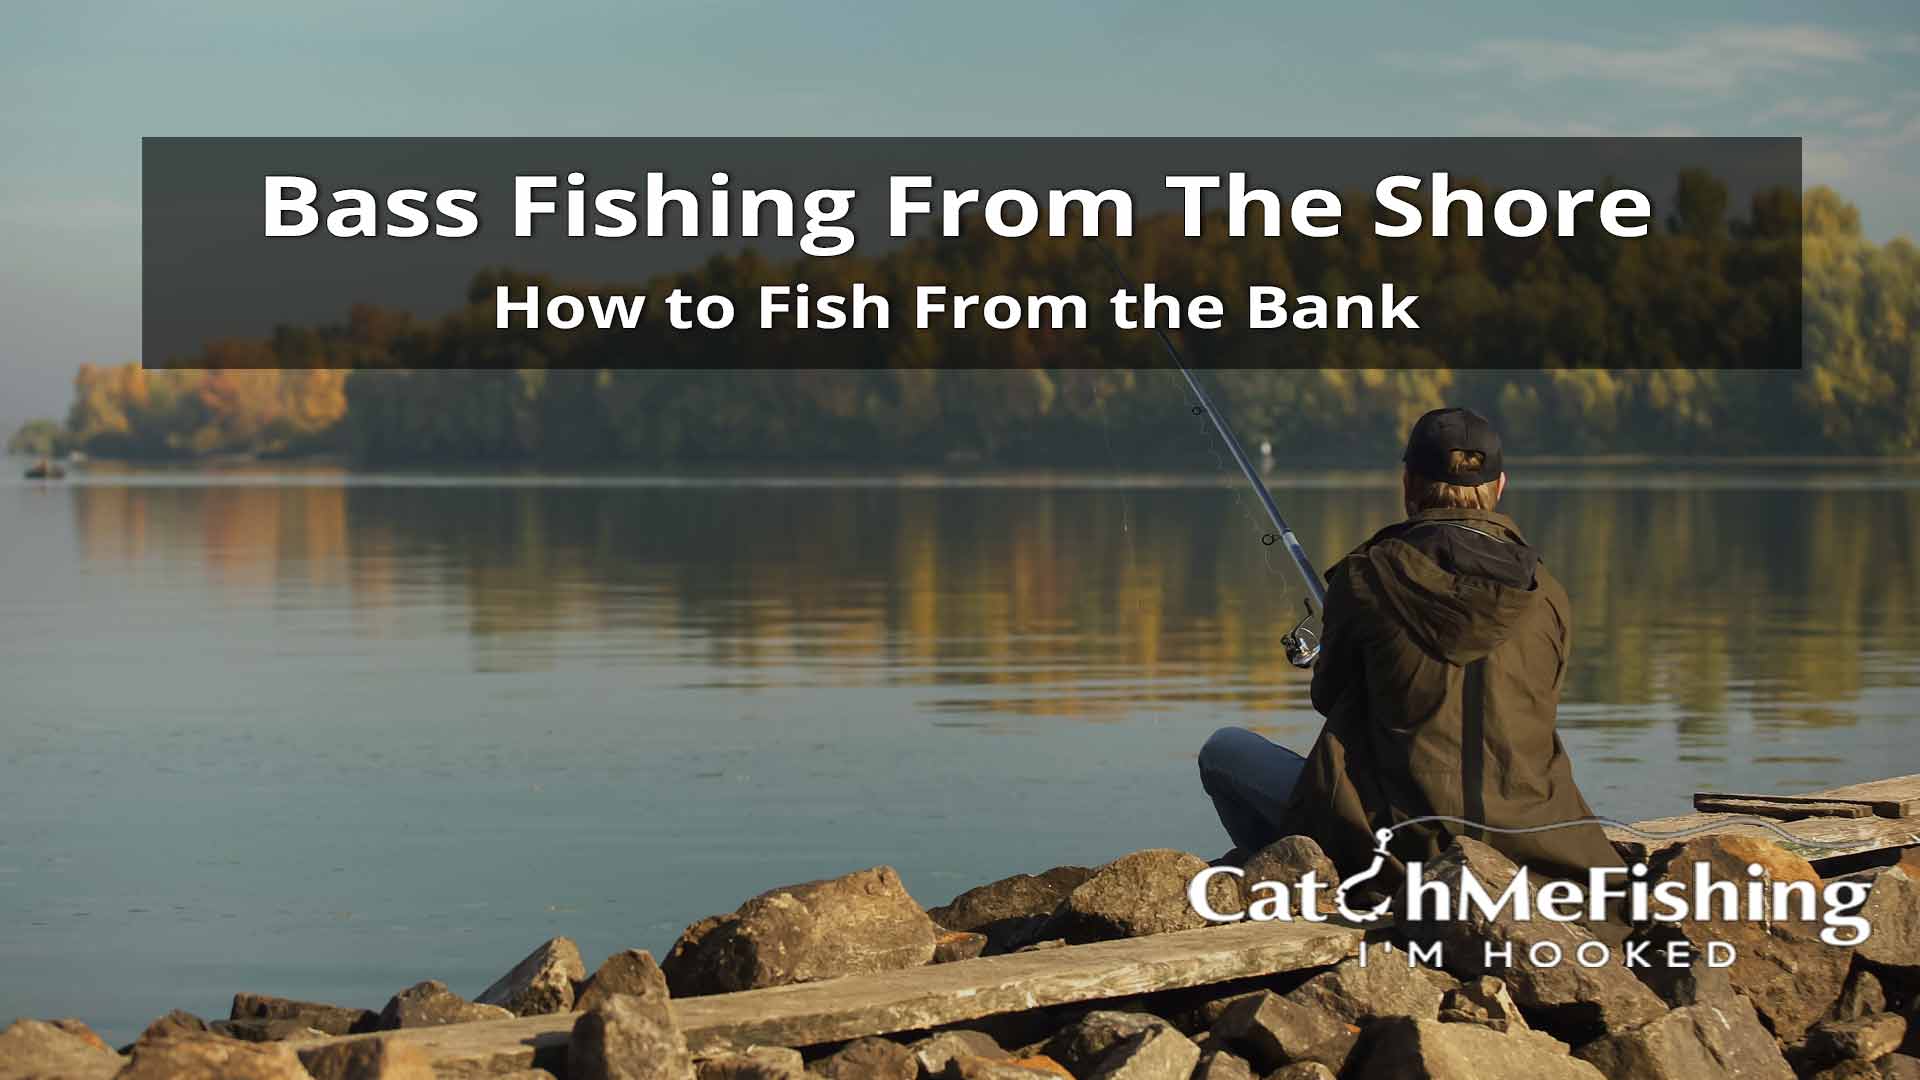 Bass Fishing From Shore - How to Fish From the Bank - CatchMeFishing